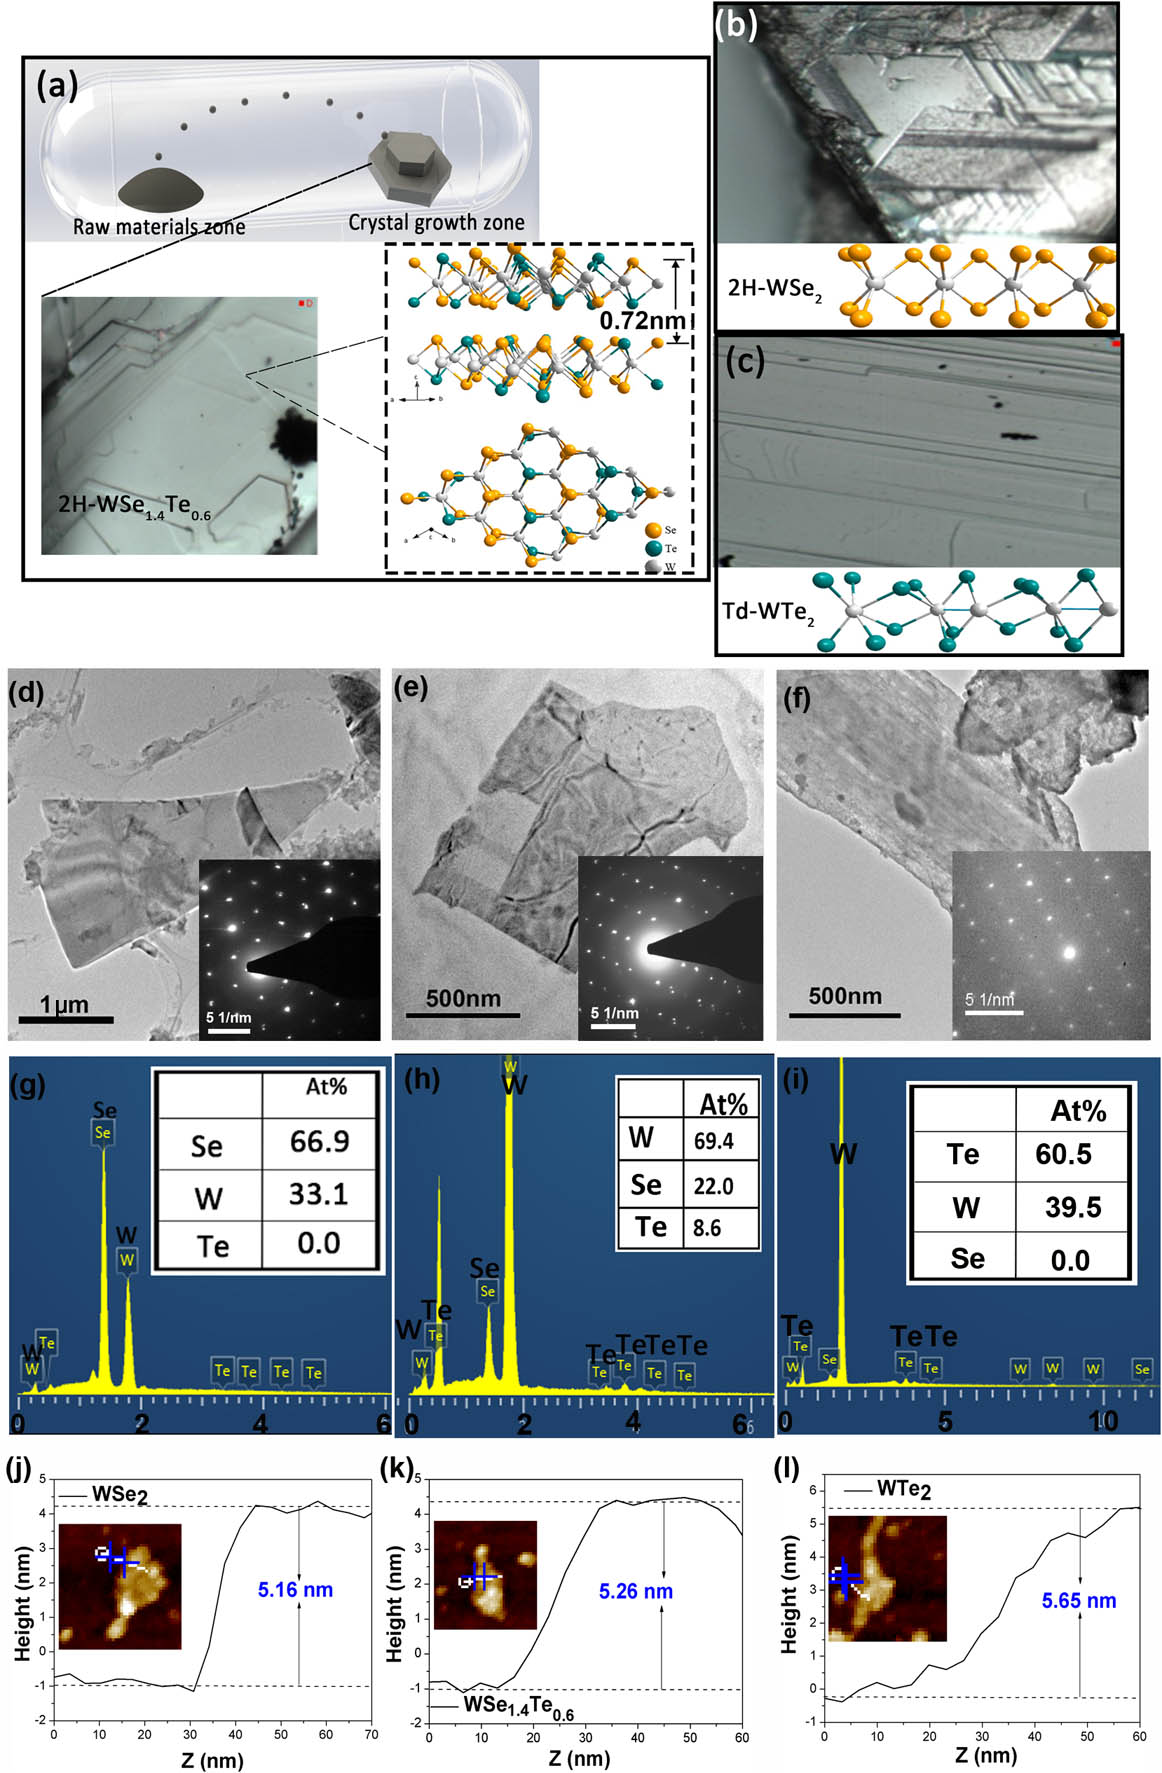 (a) Synthesis scheme of bulk crystals by CVT with dual-temperature zones. Photographs and atomic models of the formation of 2H WSe1.4Te0.6. Photographs and atomic models of layer-structure bulks of (b) 2H WSe2 and (c) Td WTe2. TEM and SEAD characterizations of few-layer nanosheets of (d) WSe2, (e) WSe1.4Te0.6, and (f) WTe2. Corresponding full EDS scanning of (g) WSe2, (h) WSe1.4Te0.6, and (i) WTe2. AFM images and thickness measurements of typical nanosheets of (j) WSe2, (k) WSe1.4Te0.6, and (l) WTe2.